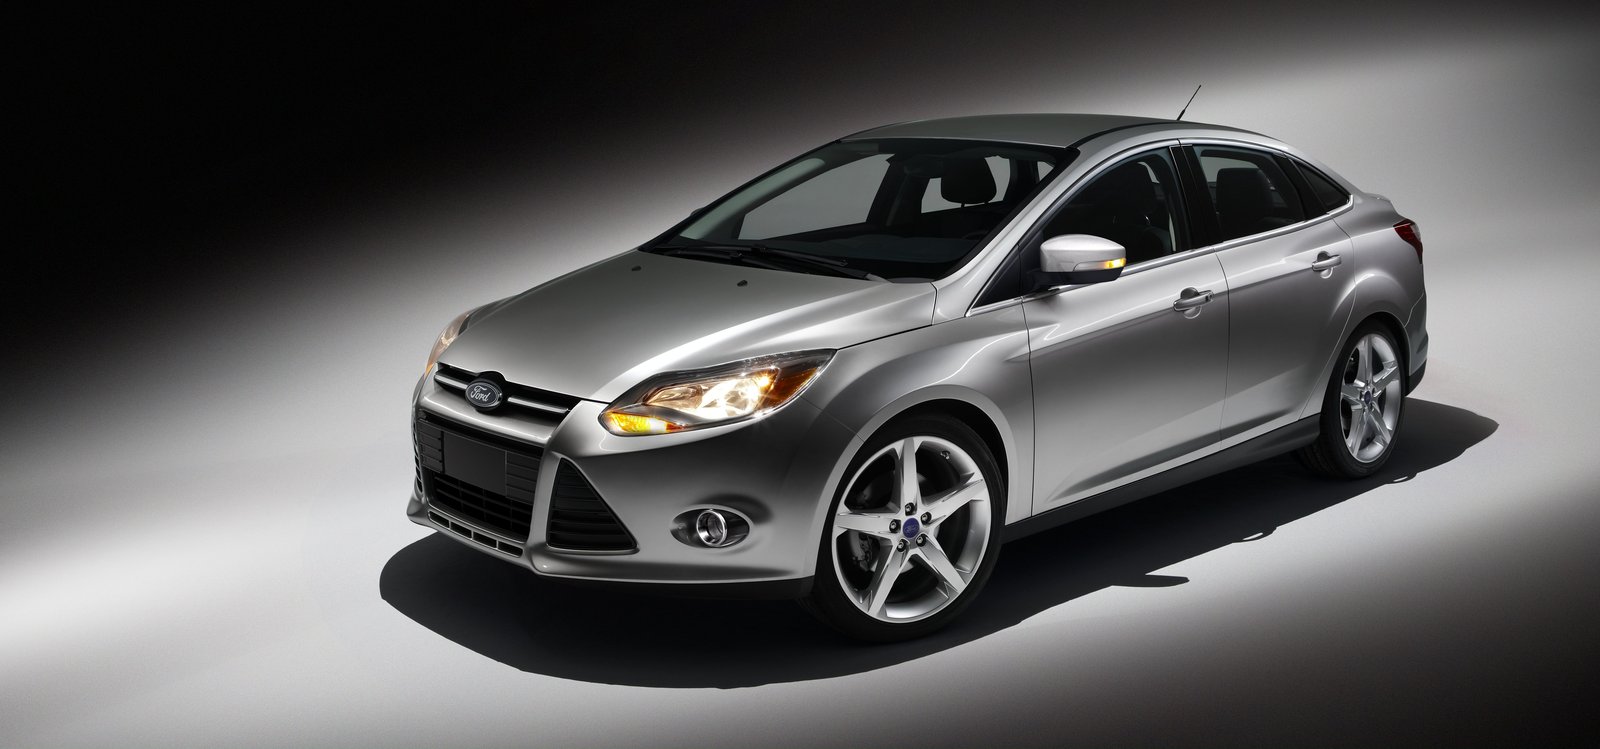 2012 Ford Focus Review Ratings Specs Prices And Photos The